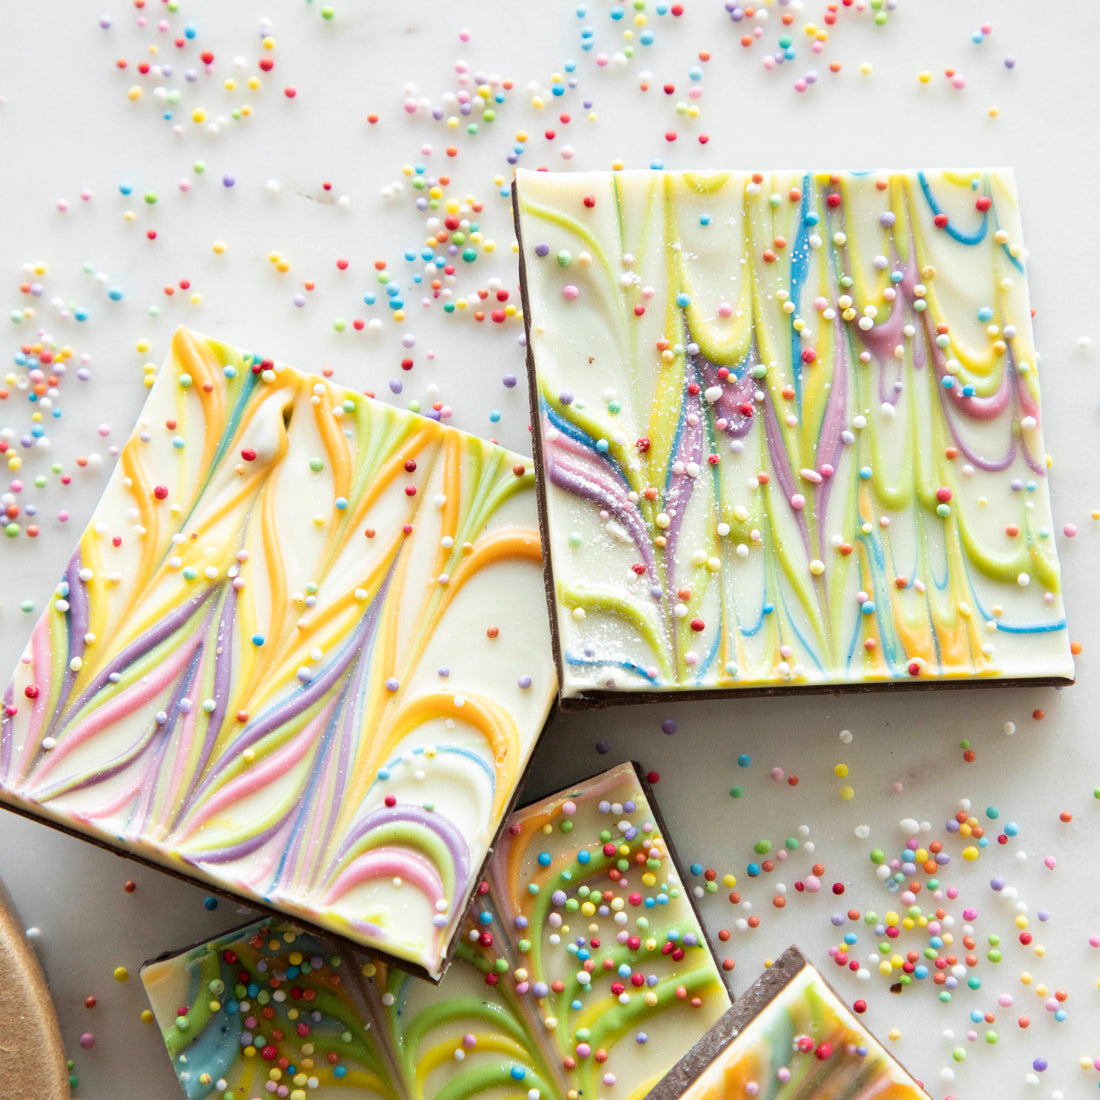 Four squares of Hester &amp; Cook Rainbow Bark with rainbow sprinkles on top.